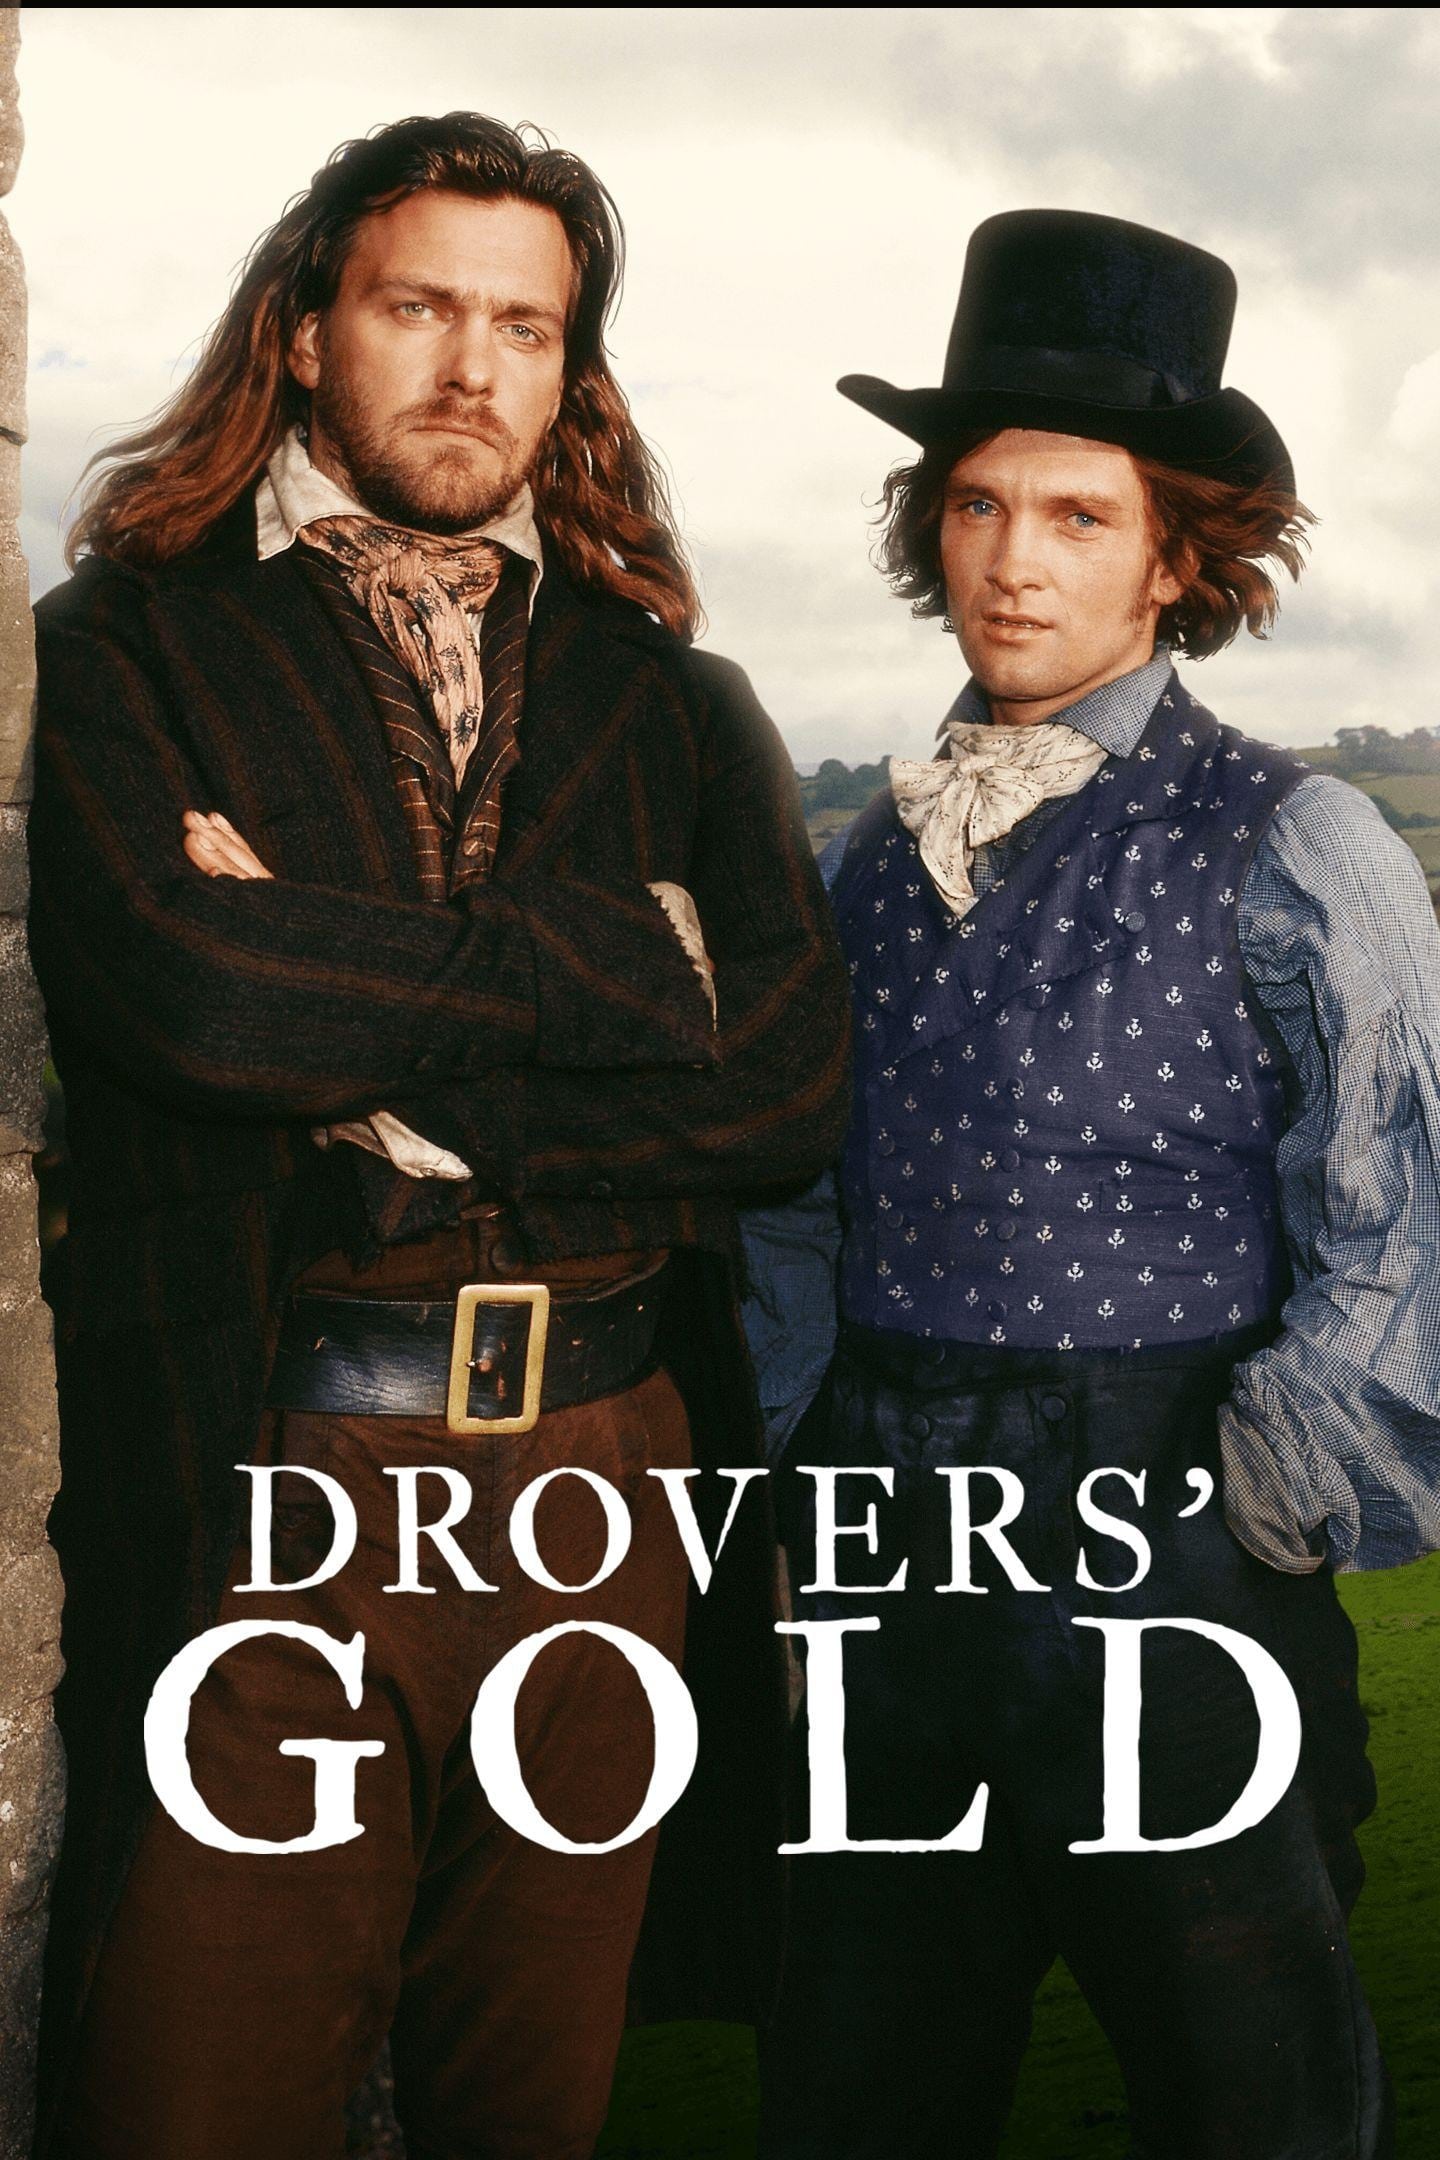 Drovers' Gold